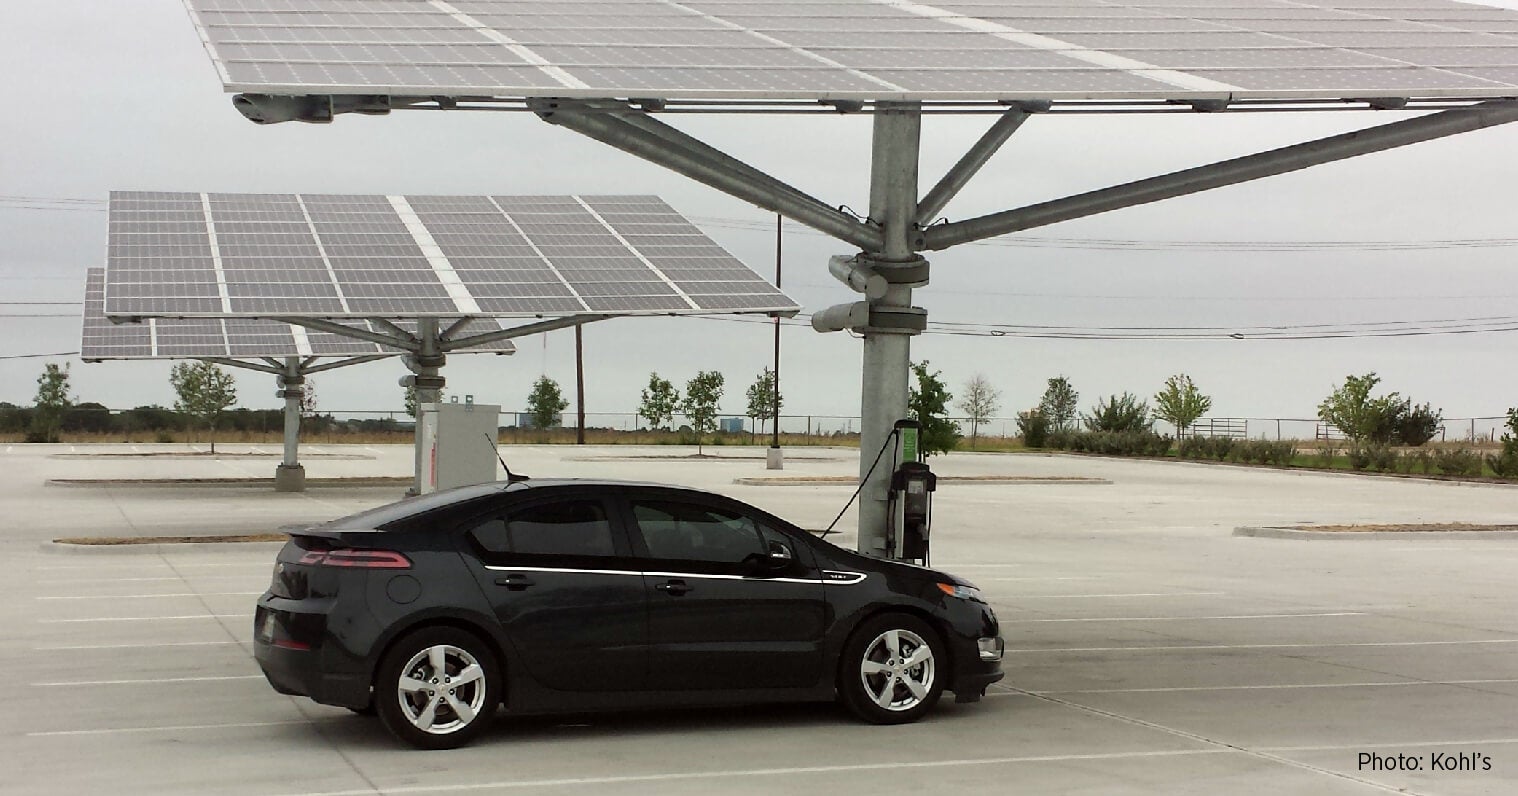 Charging an EV with solar energy